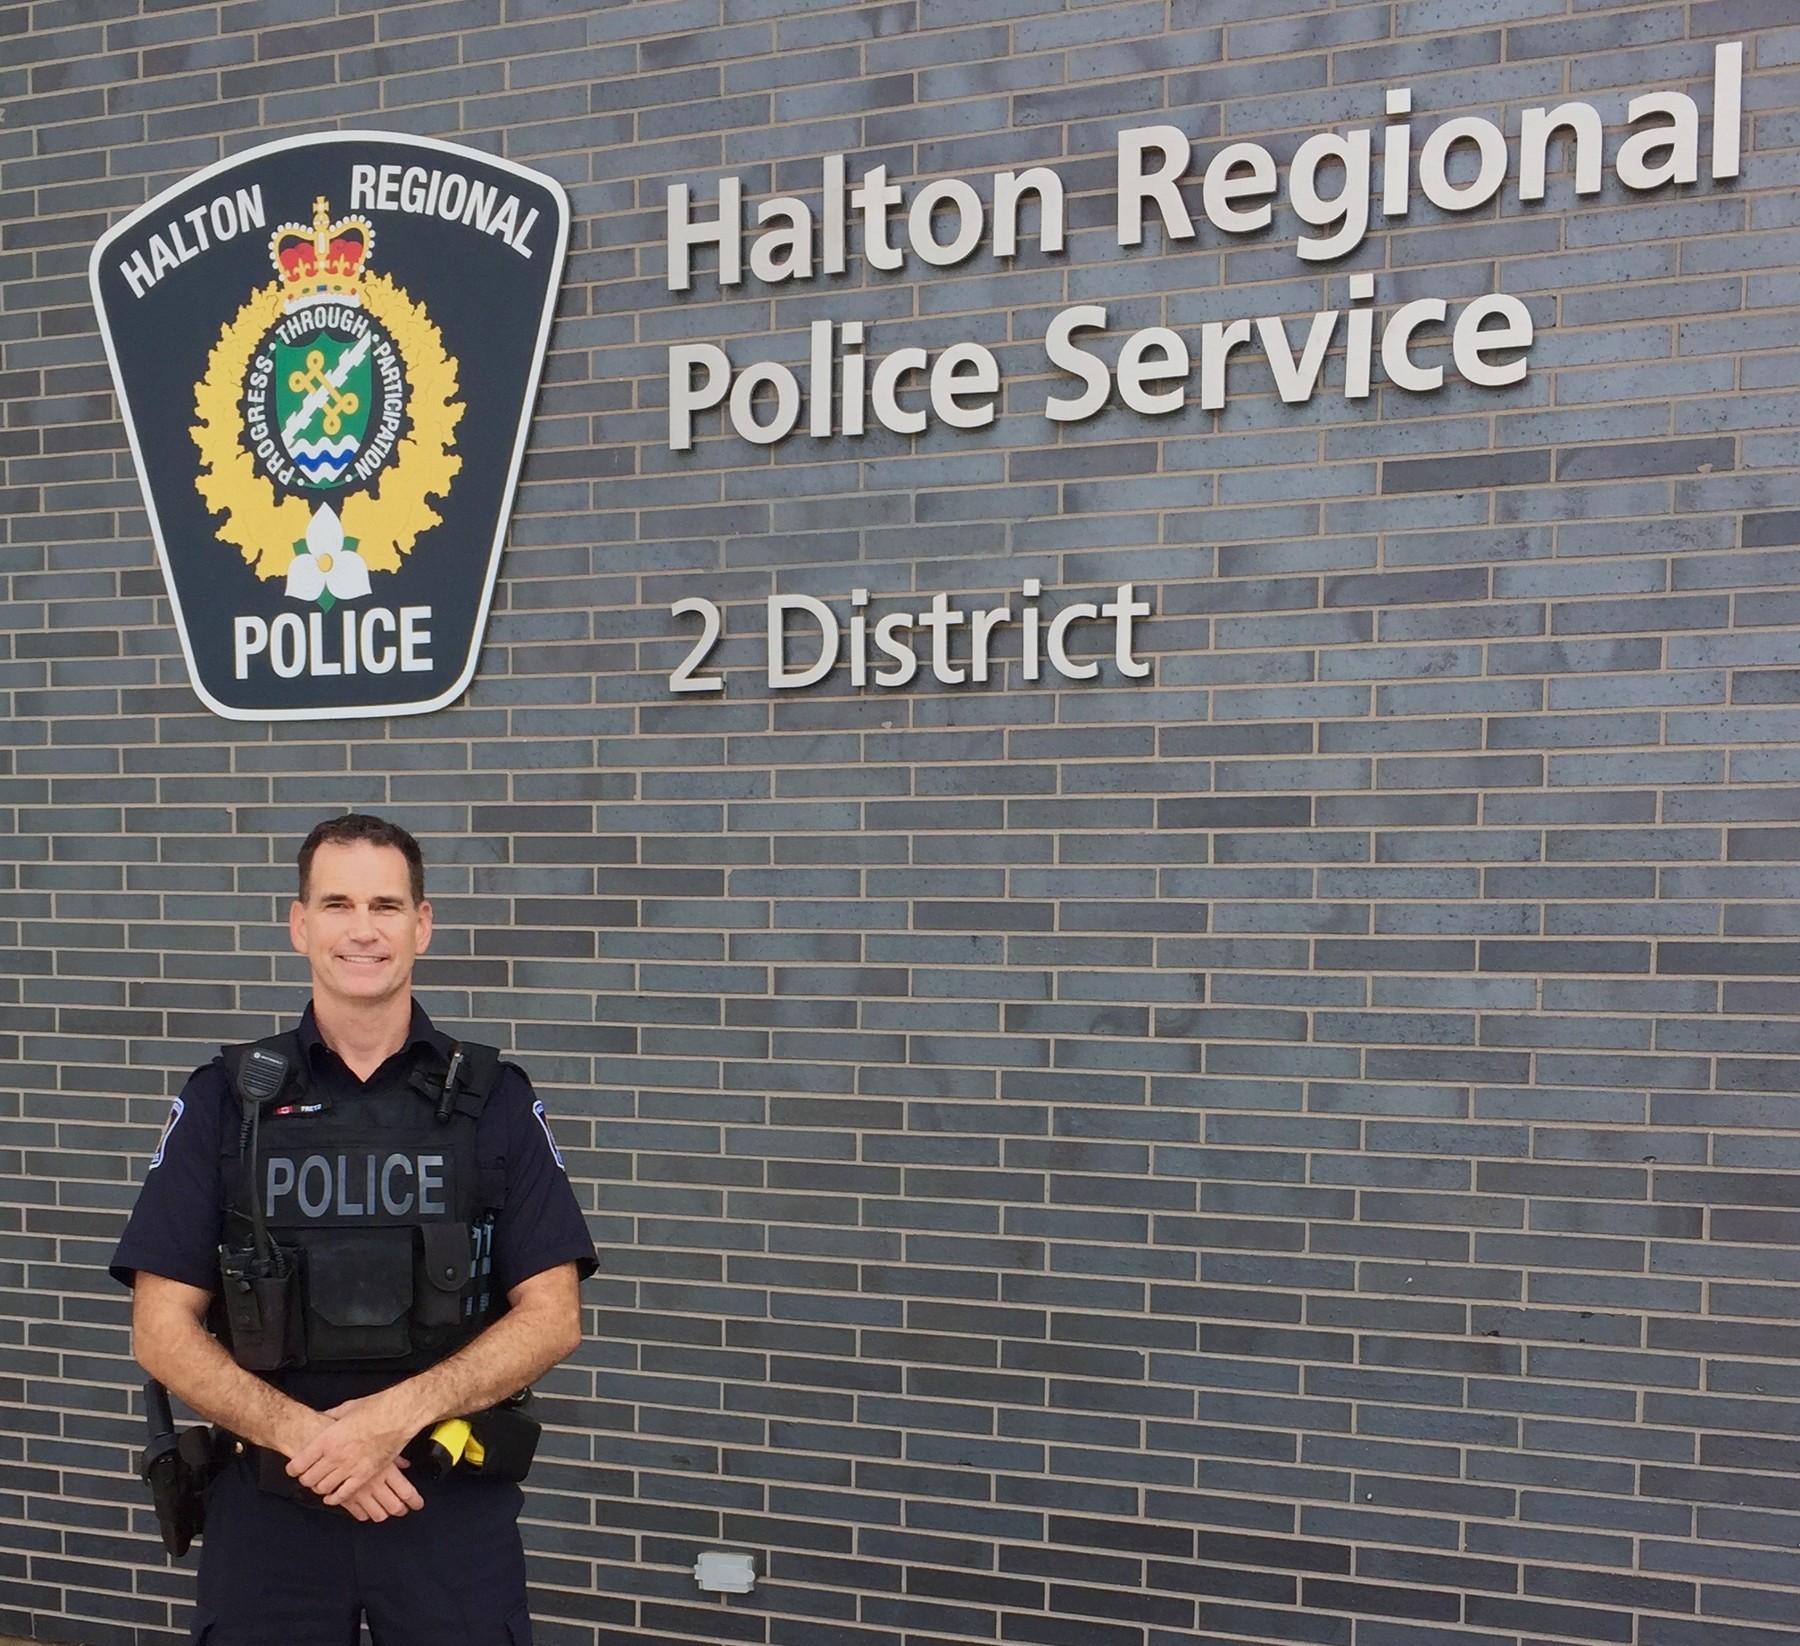 stabbed Male white Constable in front of Division 2 halton regional police | OakvilleNews.Org